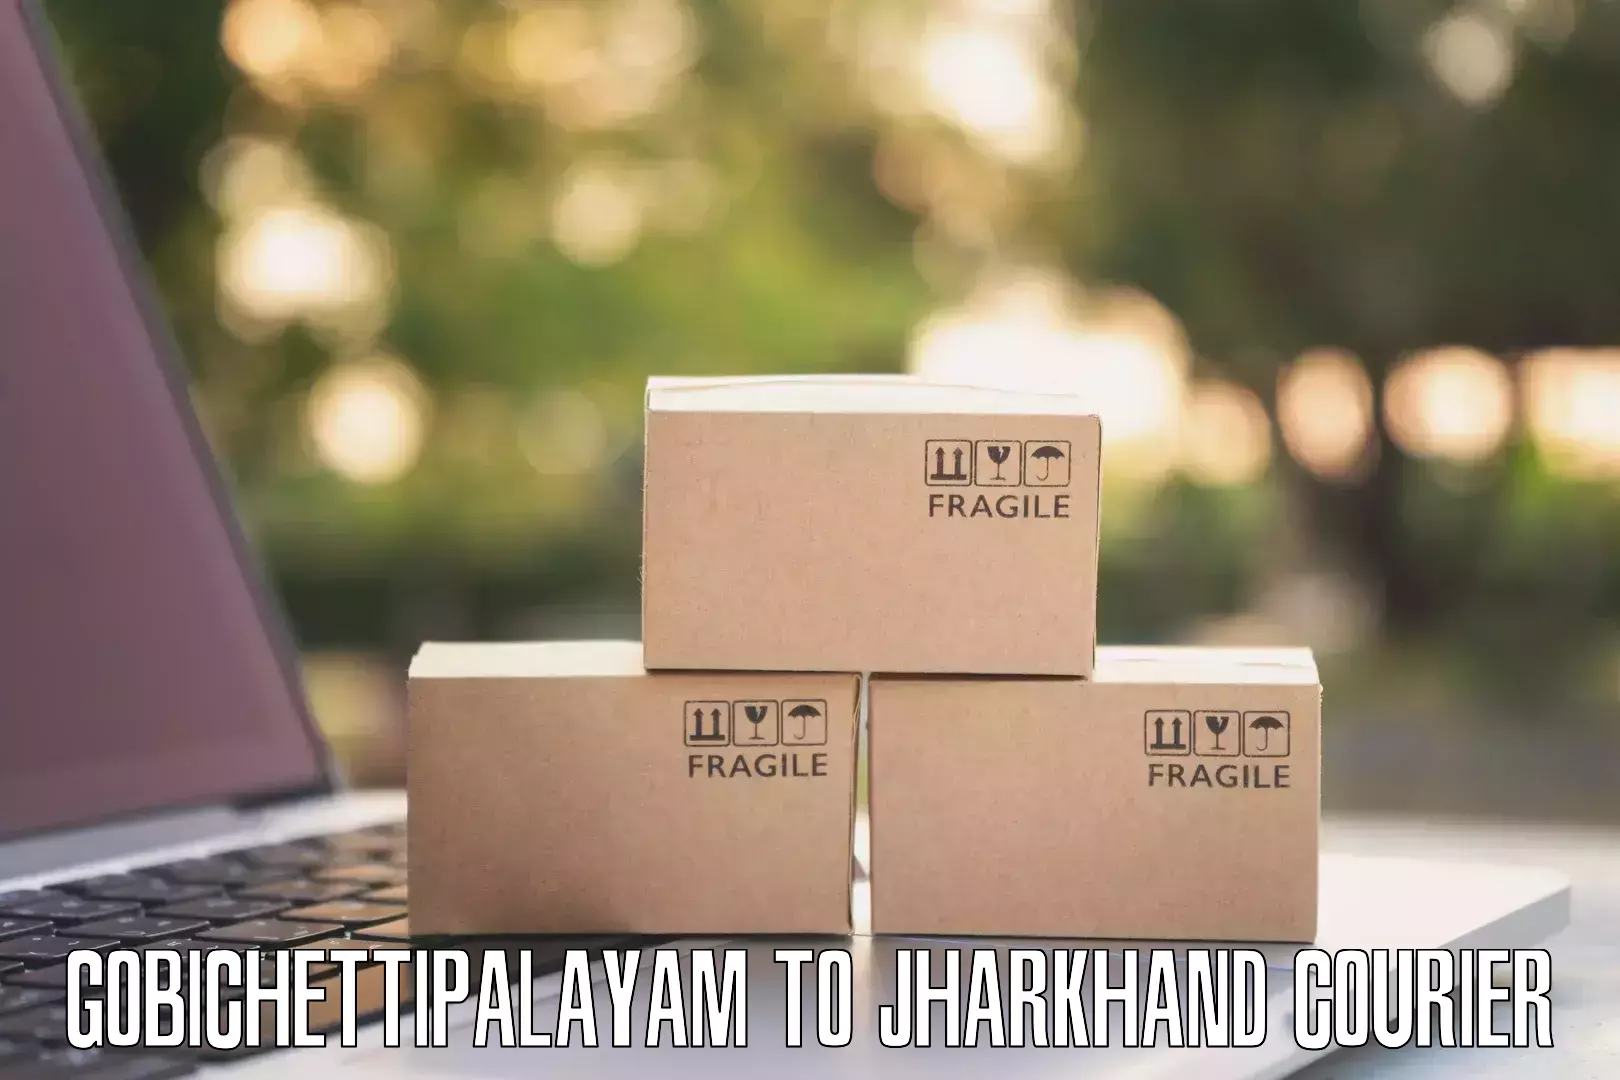 Nationwide delivery network Gobichettipalayam to Poreyahat